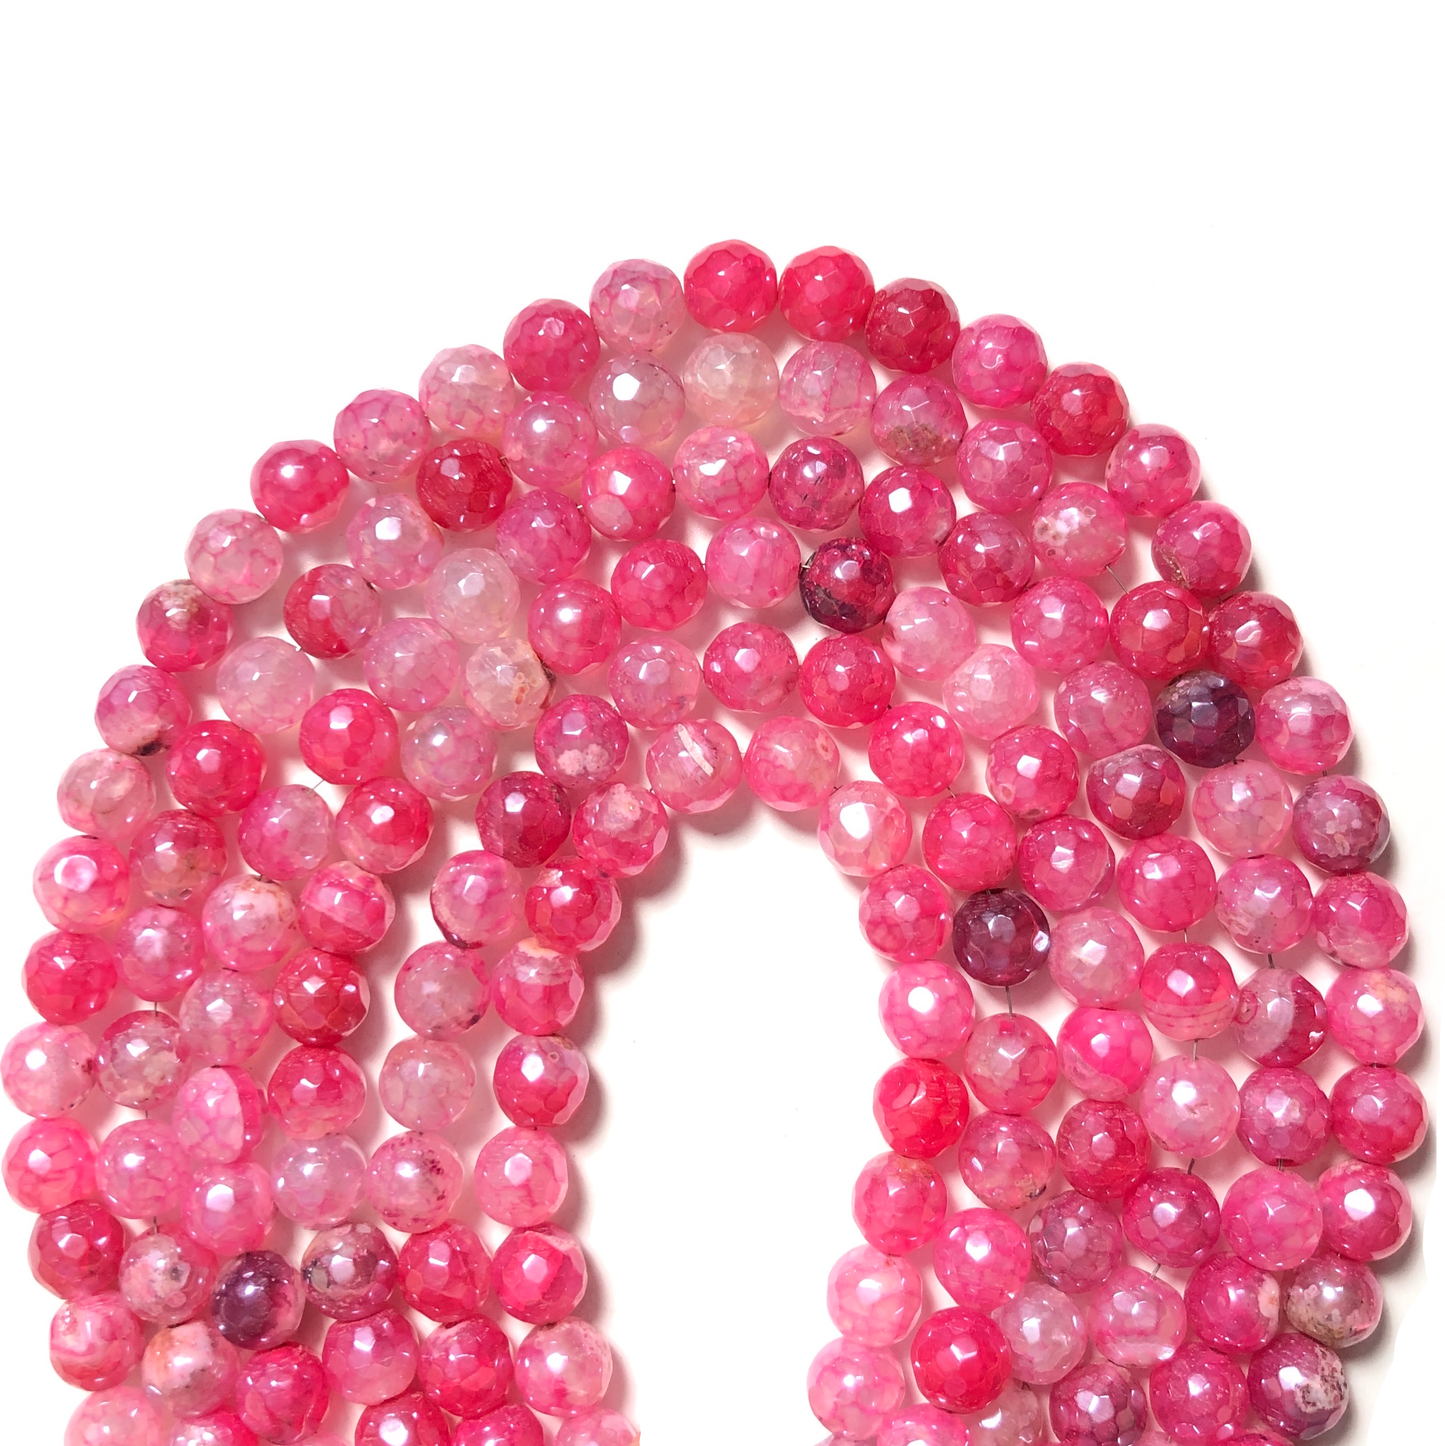 2 Strands/lot 8mm Electroplated Pink Agate Faceted Stone Beads Electroplated Beads Breast Cancer Awareness Electroplated Faceted Agate Beads New Beads Arrivals Charms Beads Beyond